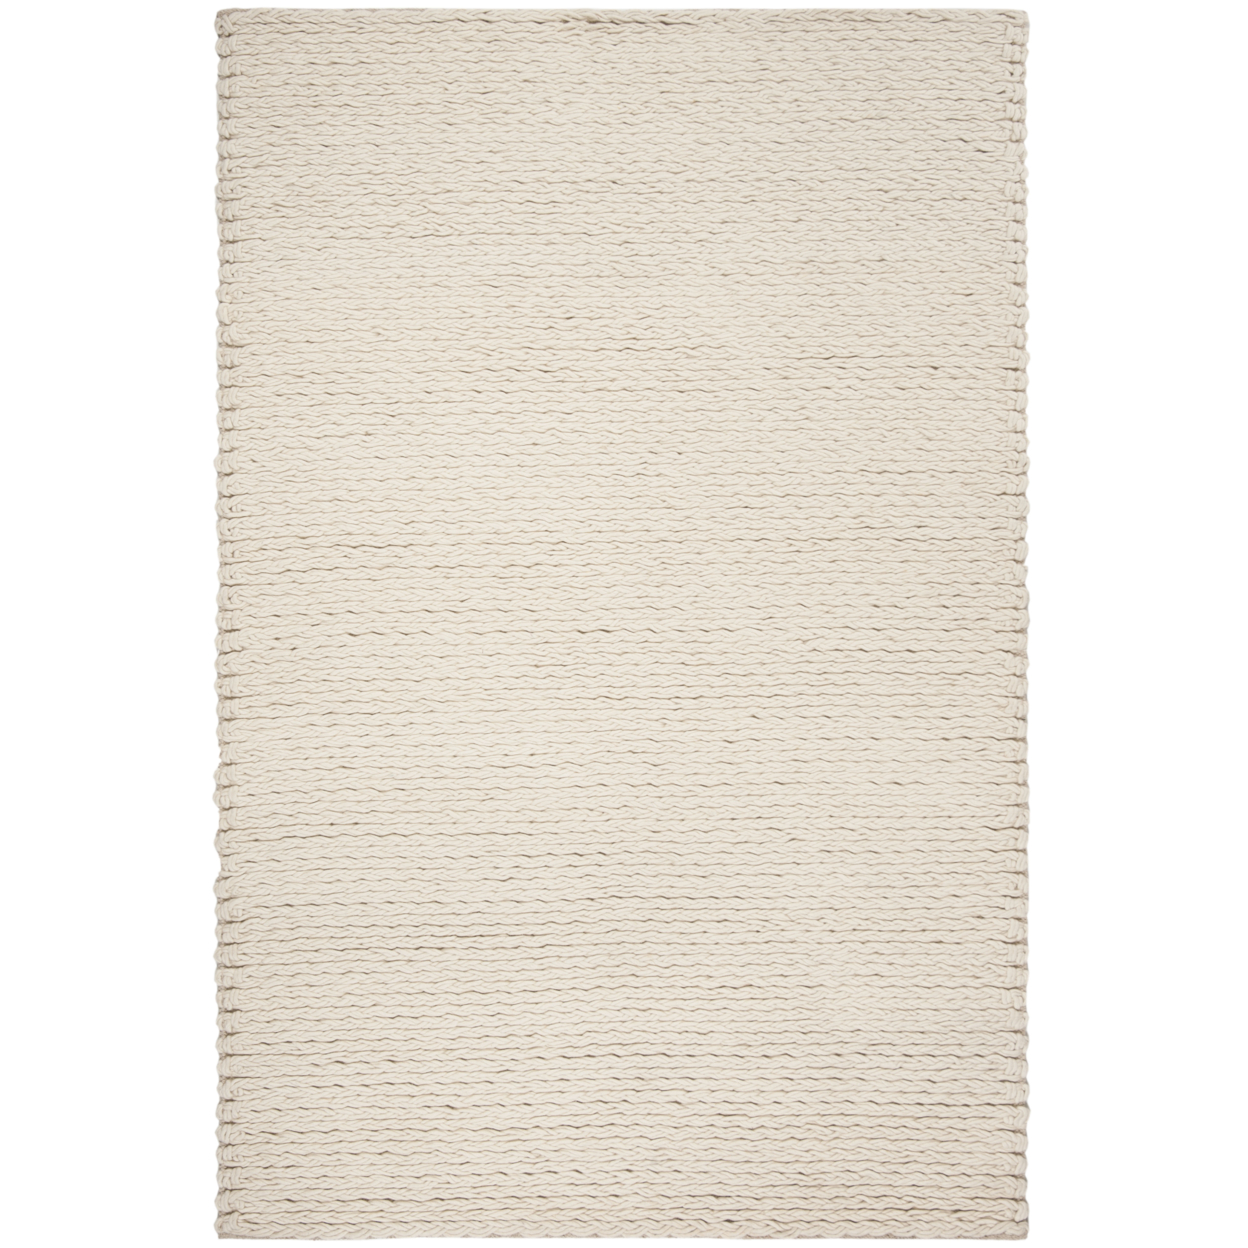 SAFAVIEH Natura Collection NAT802A Handwoven Ivory Rug - 8' X 10'